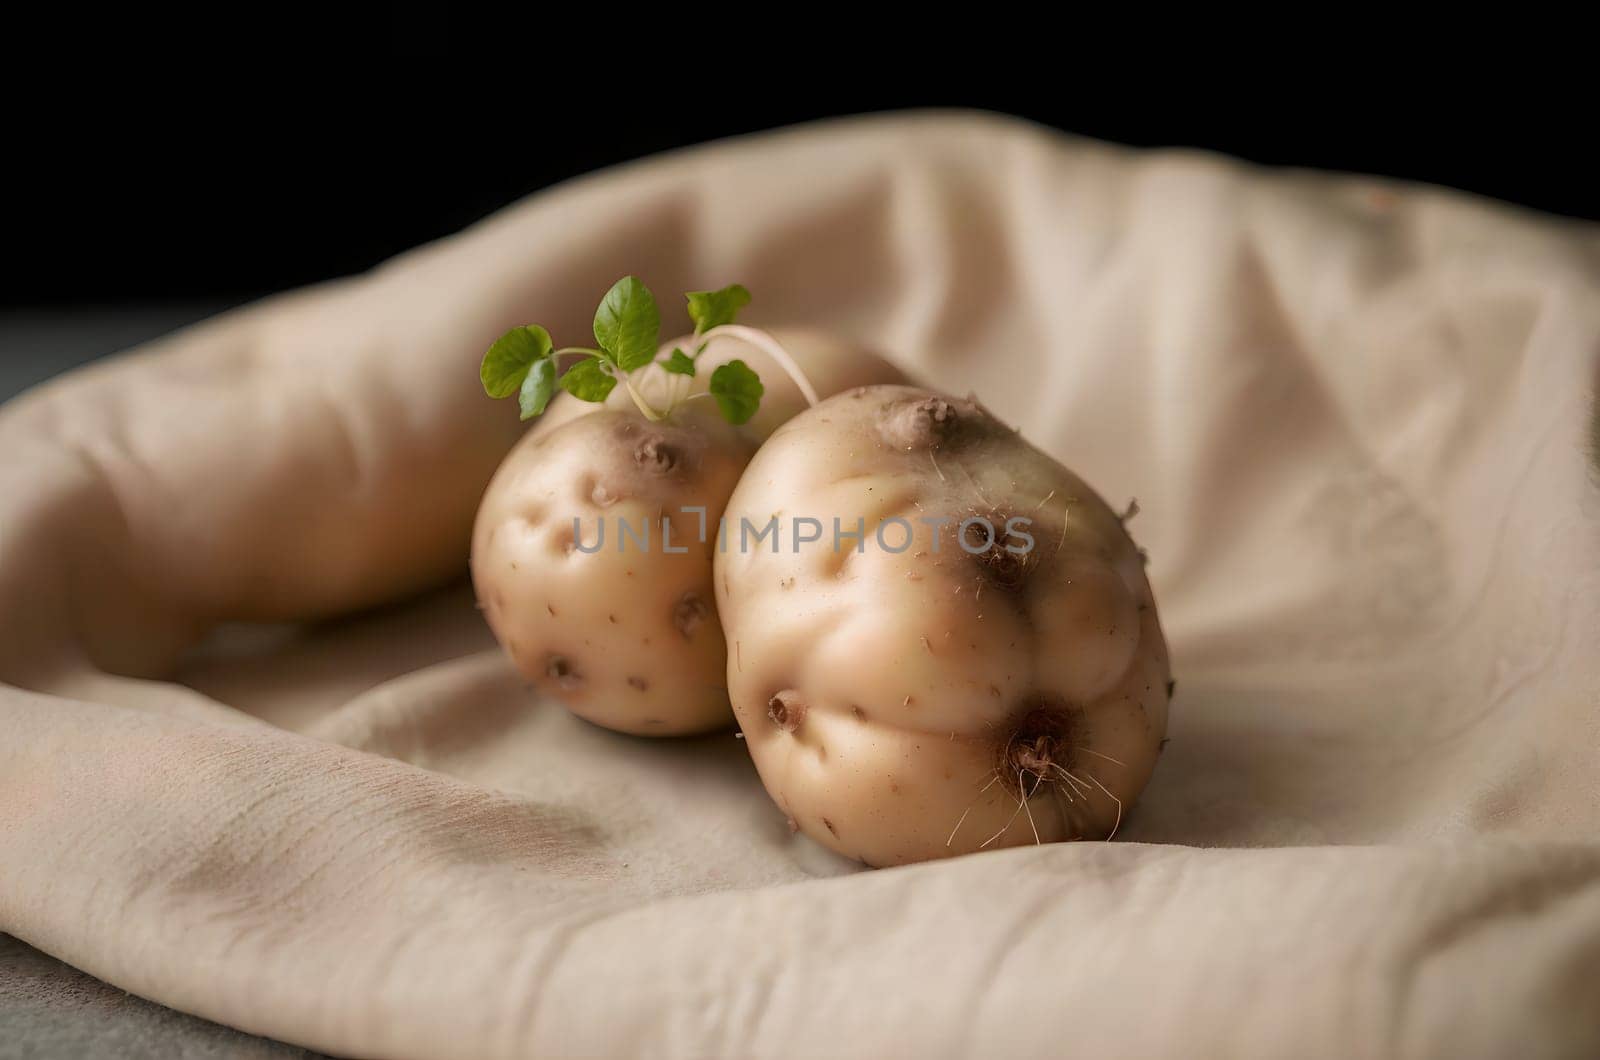 Spring potatoes with sprouted sprouts, ready for planting in the ground. AI generated image.